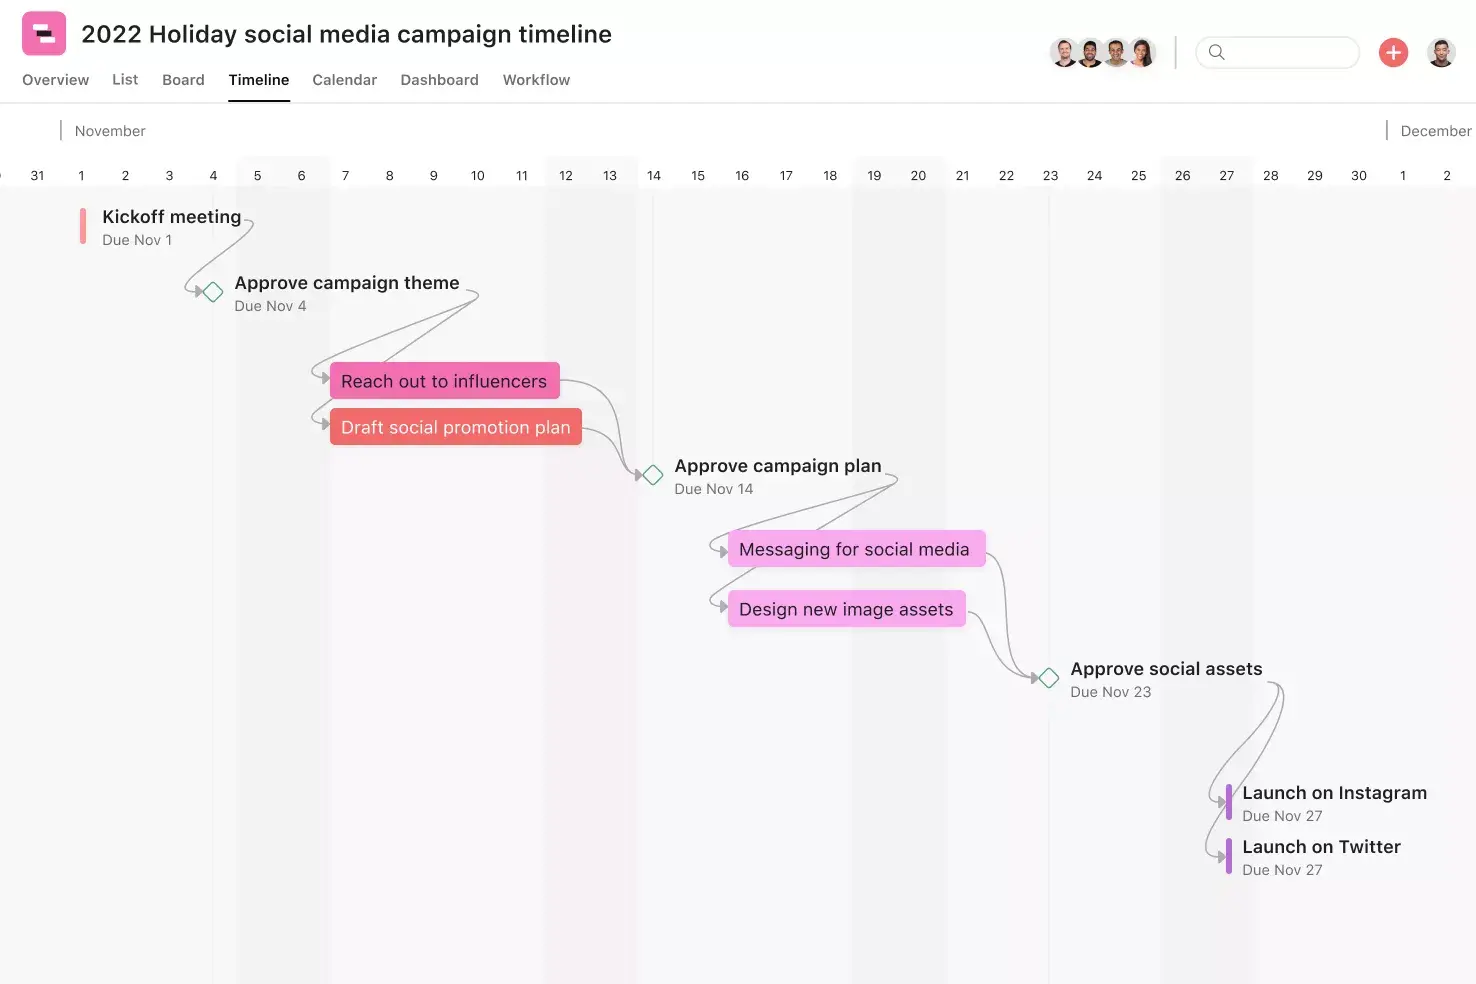 [Product ui] Timeline in Asana, Gantt chart-style view (Timeline)